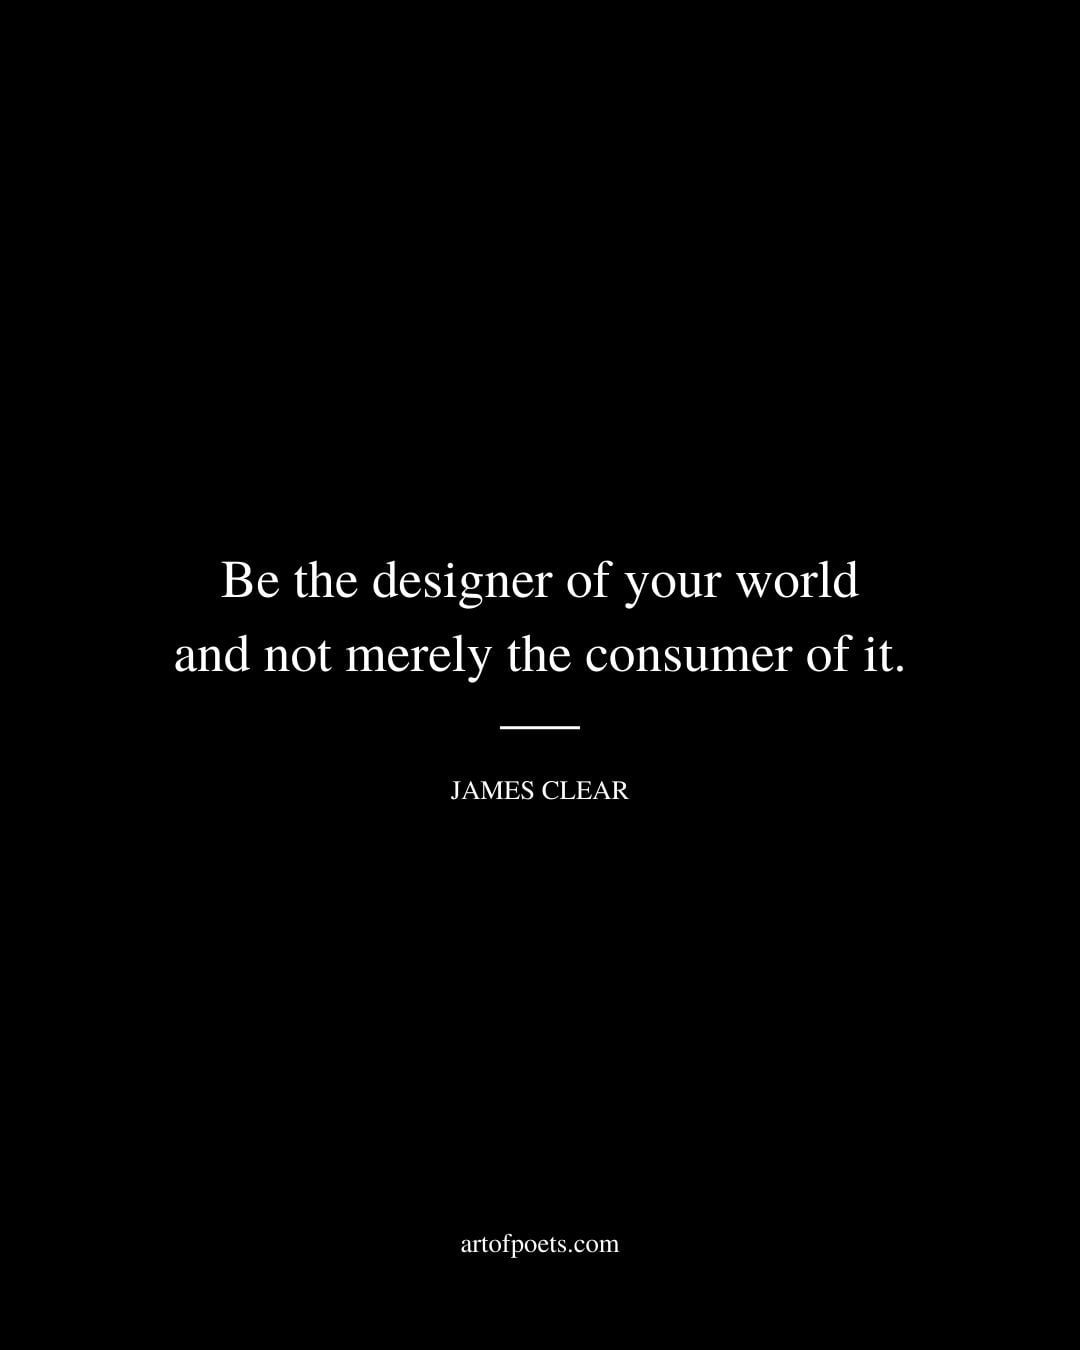 Be the designer of your world and not merely the consumer of it